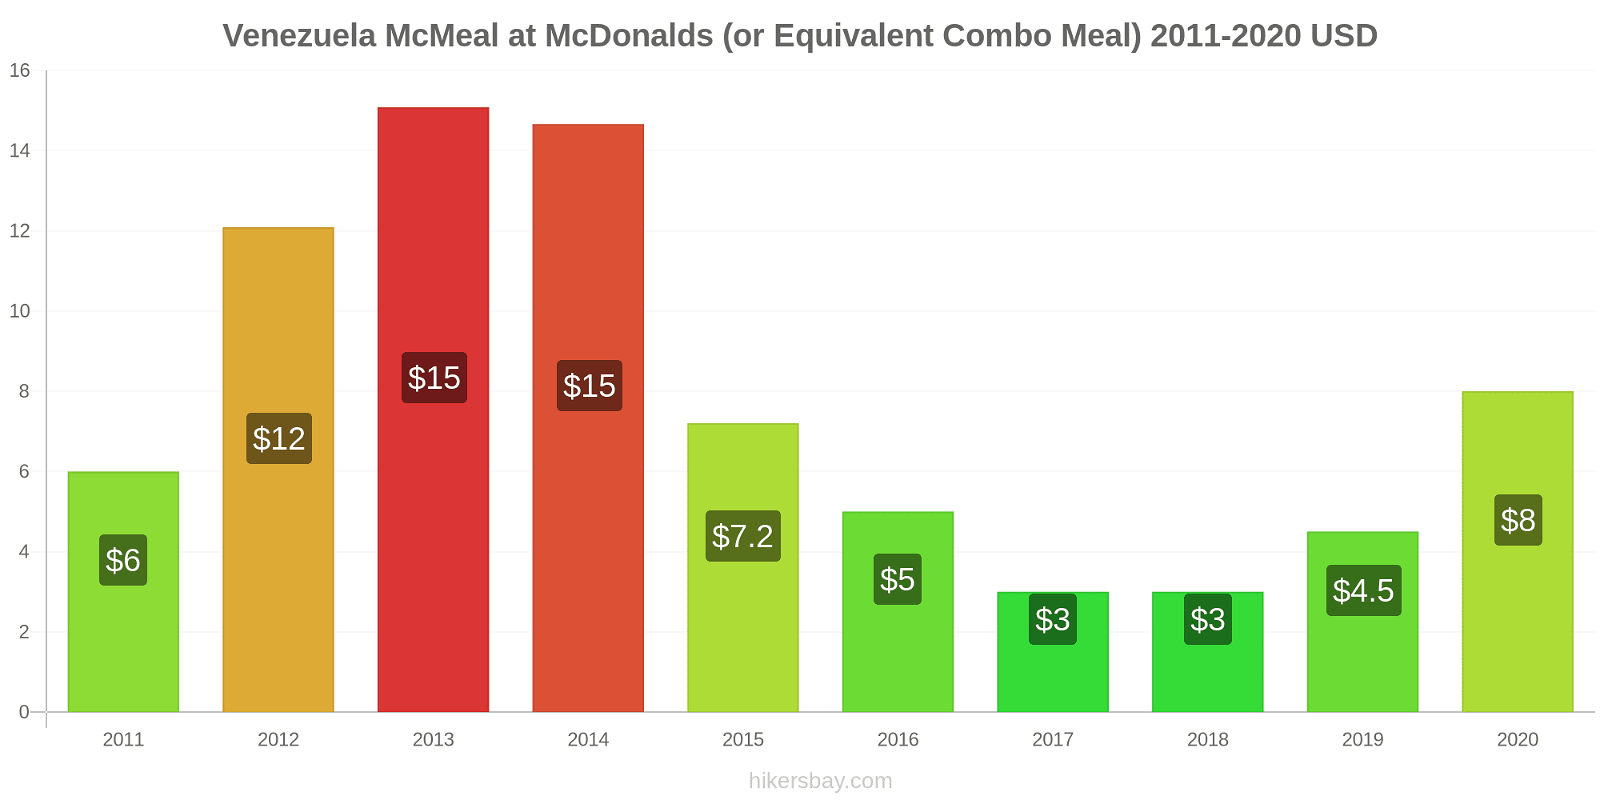 Venezuela price changes McMeal at McDonalds (or Equivalent Combo Meal) hikersbay.com